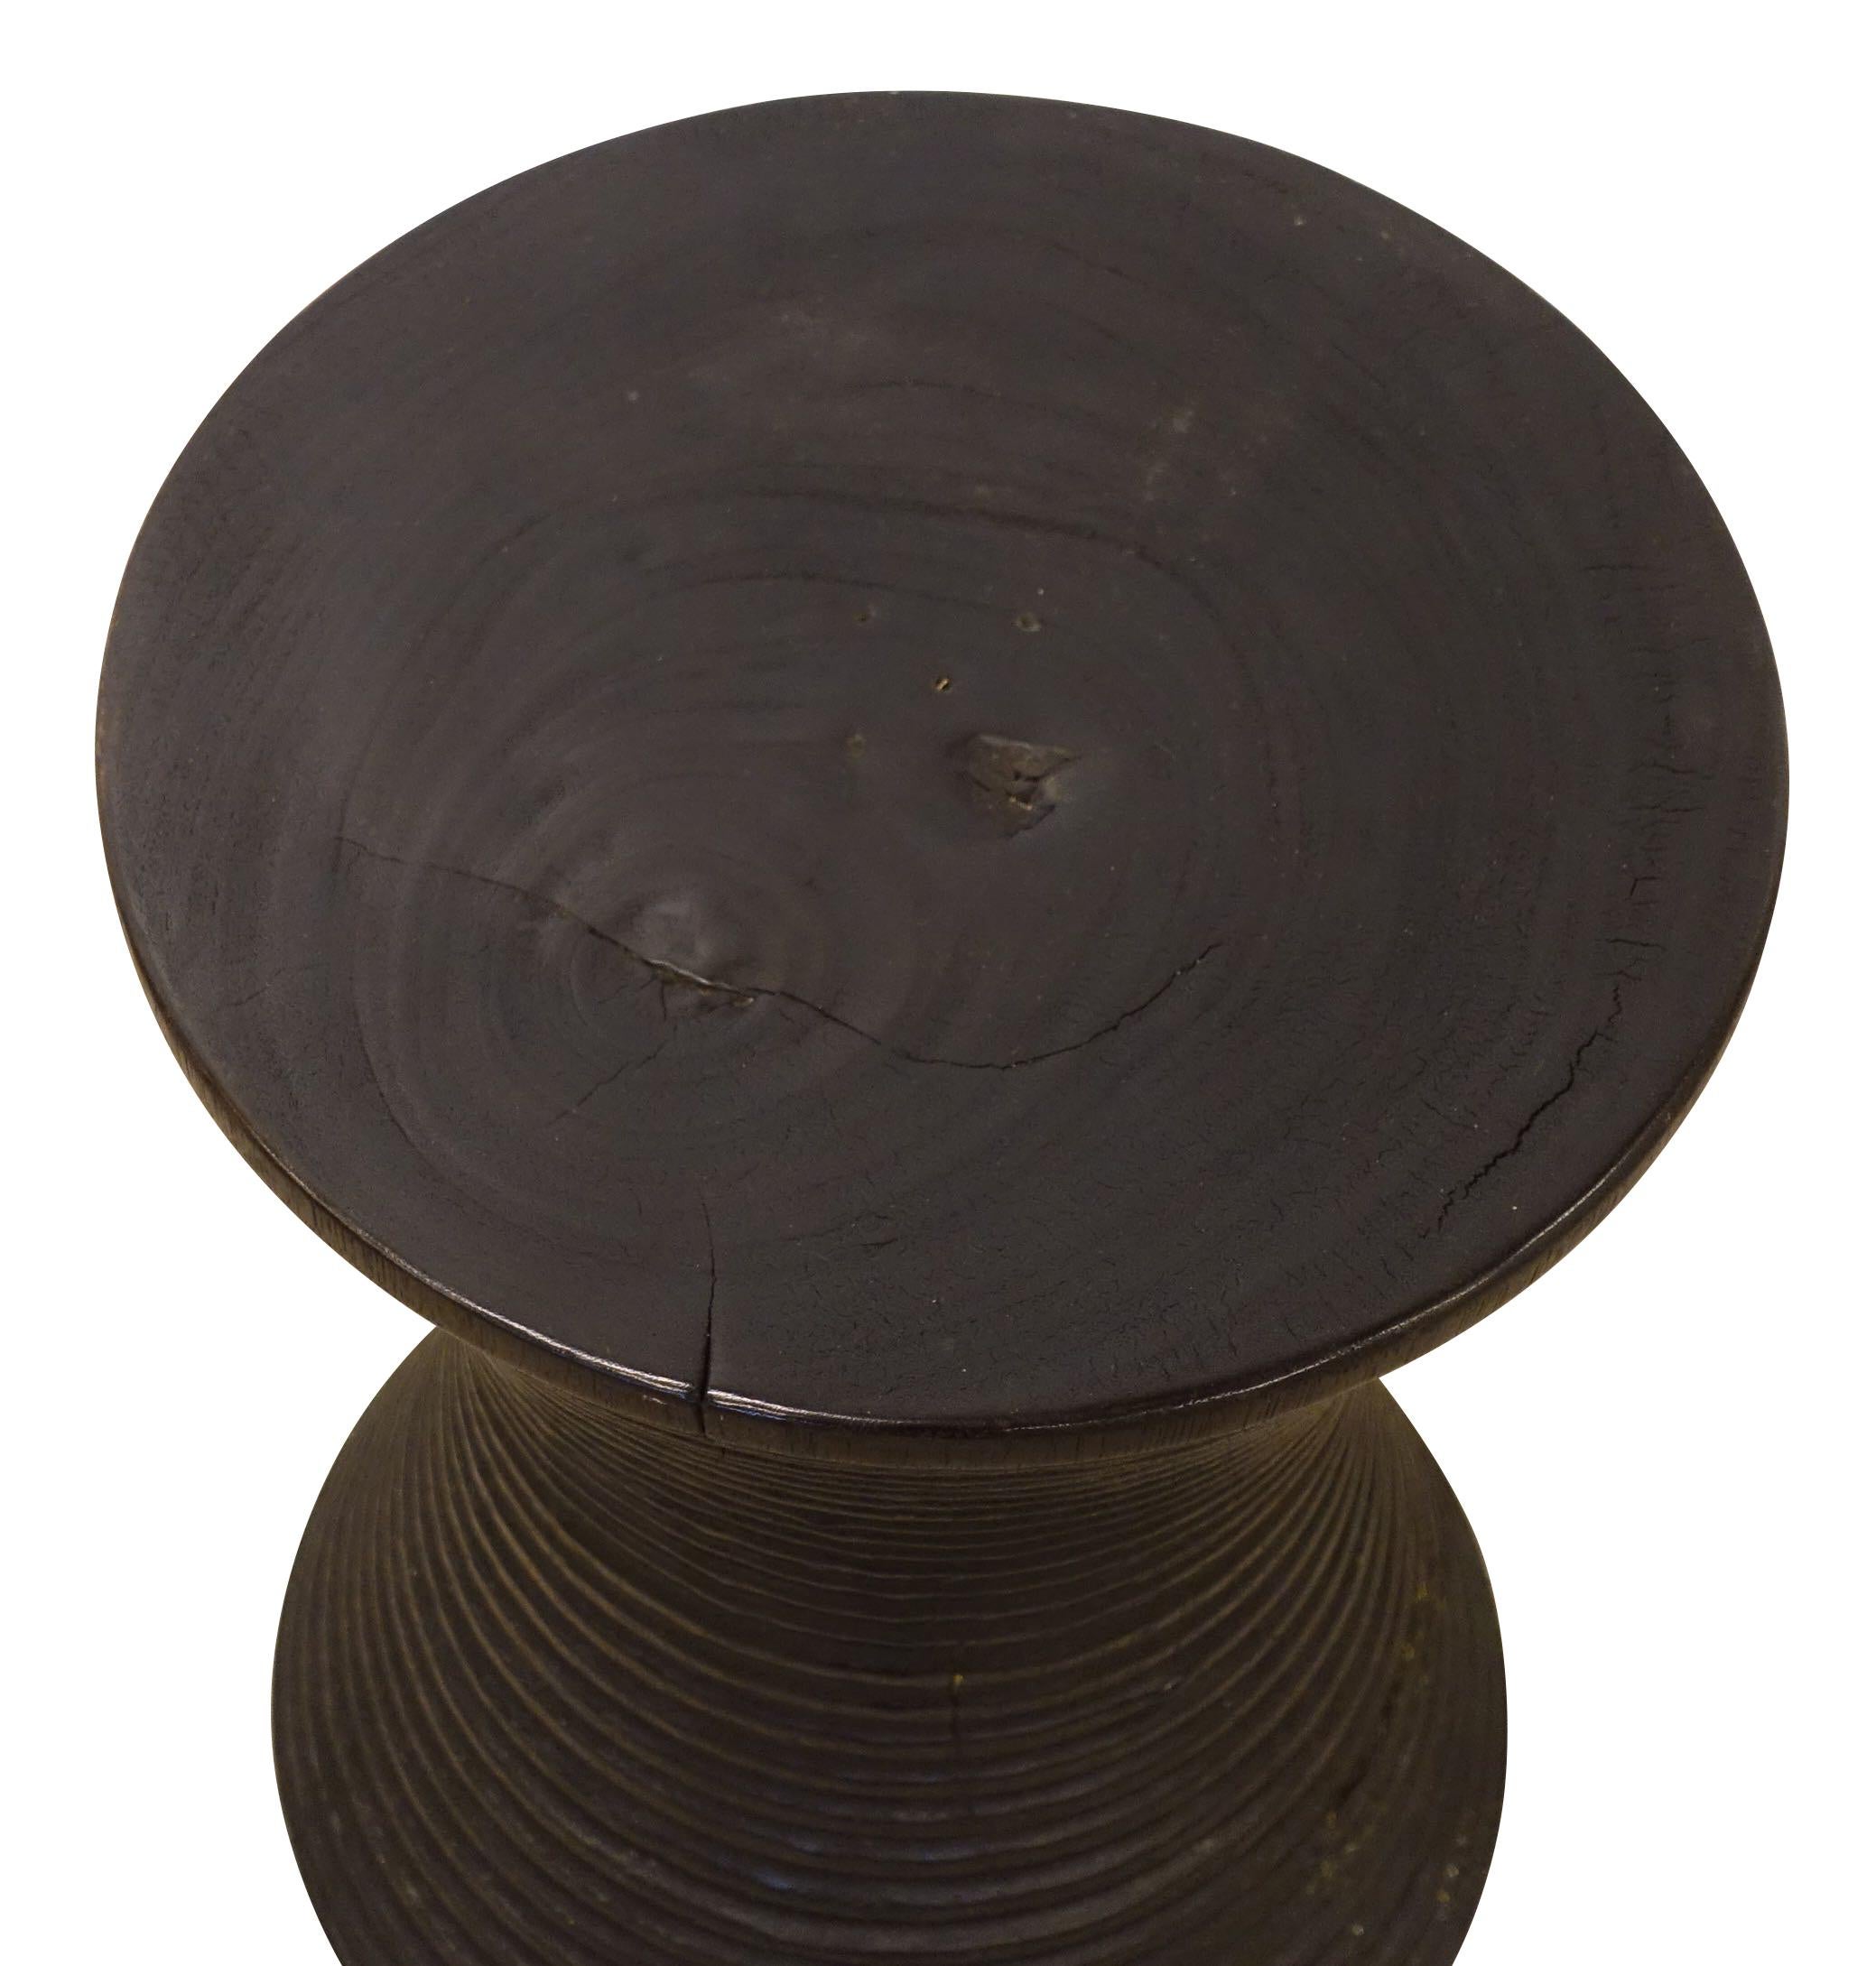 Contemporary Indonesian lychee wood side table
Hour glass shape
Decorative horizontal rib carved lychee wood base.
 